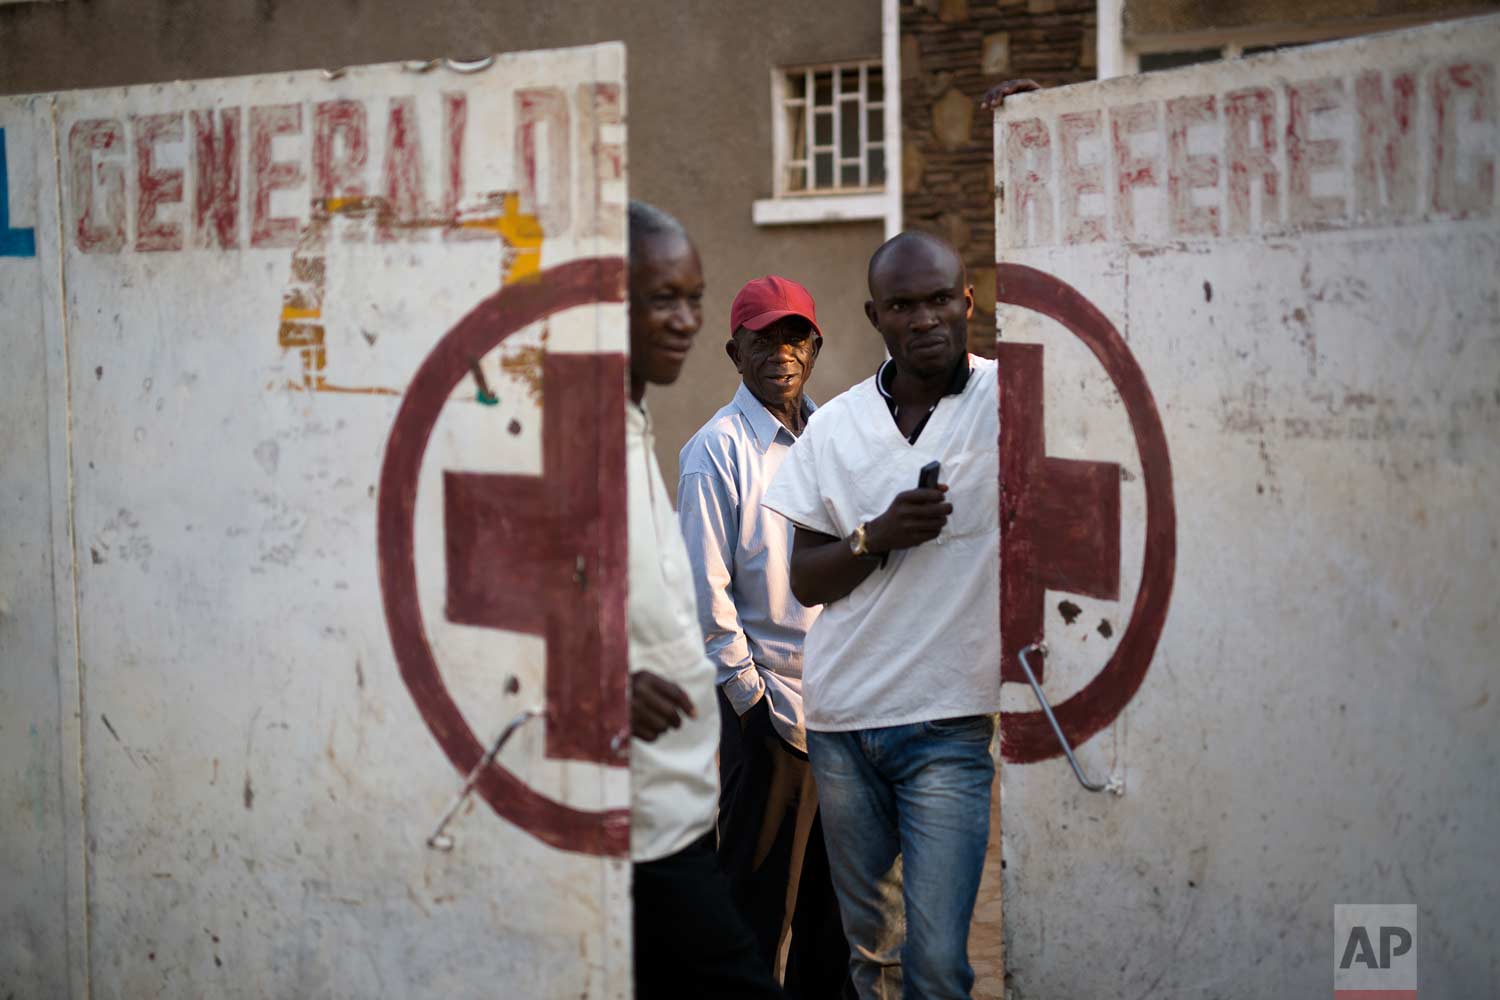  Employees guard the door of the Katuba Reference Hospital in Lubumbashi, Democratic Republic of the Congo on Monday, Aug. 13, 2018. (AP Photo/Jerome Delay) 